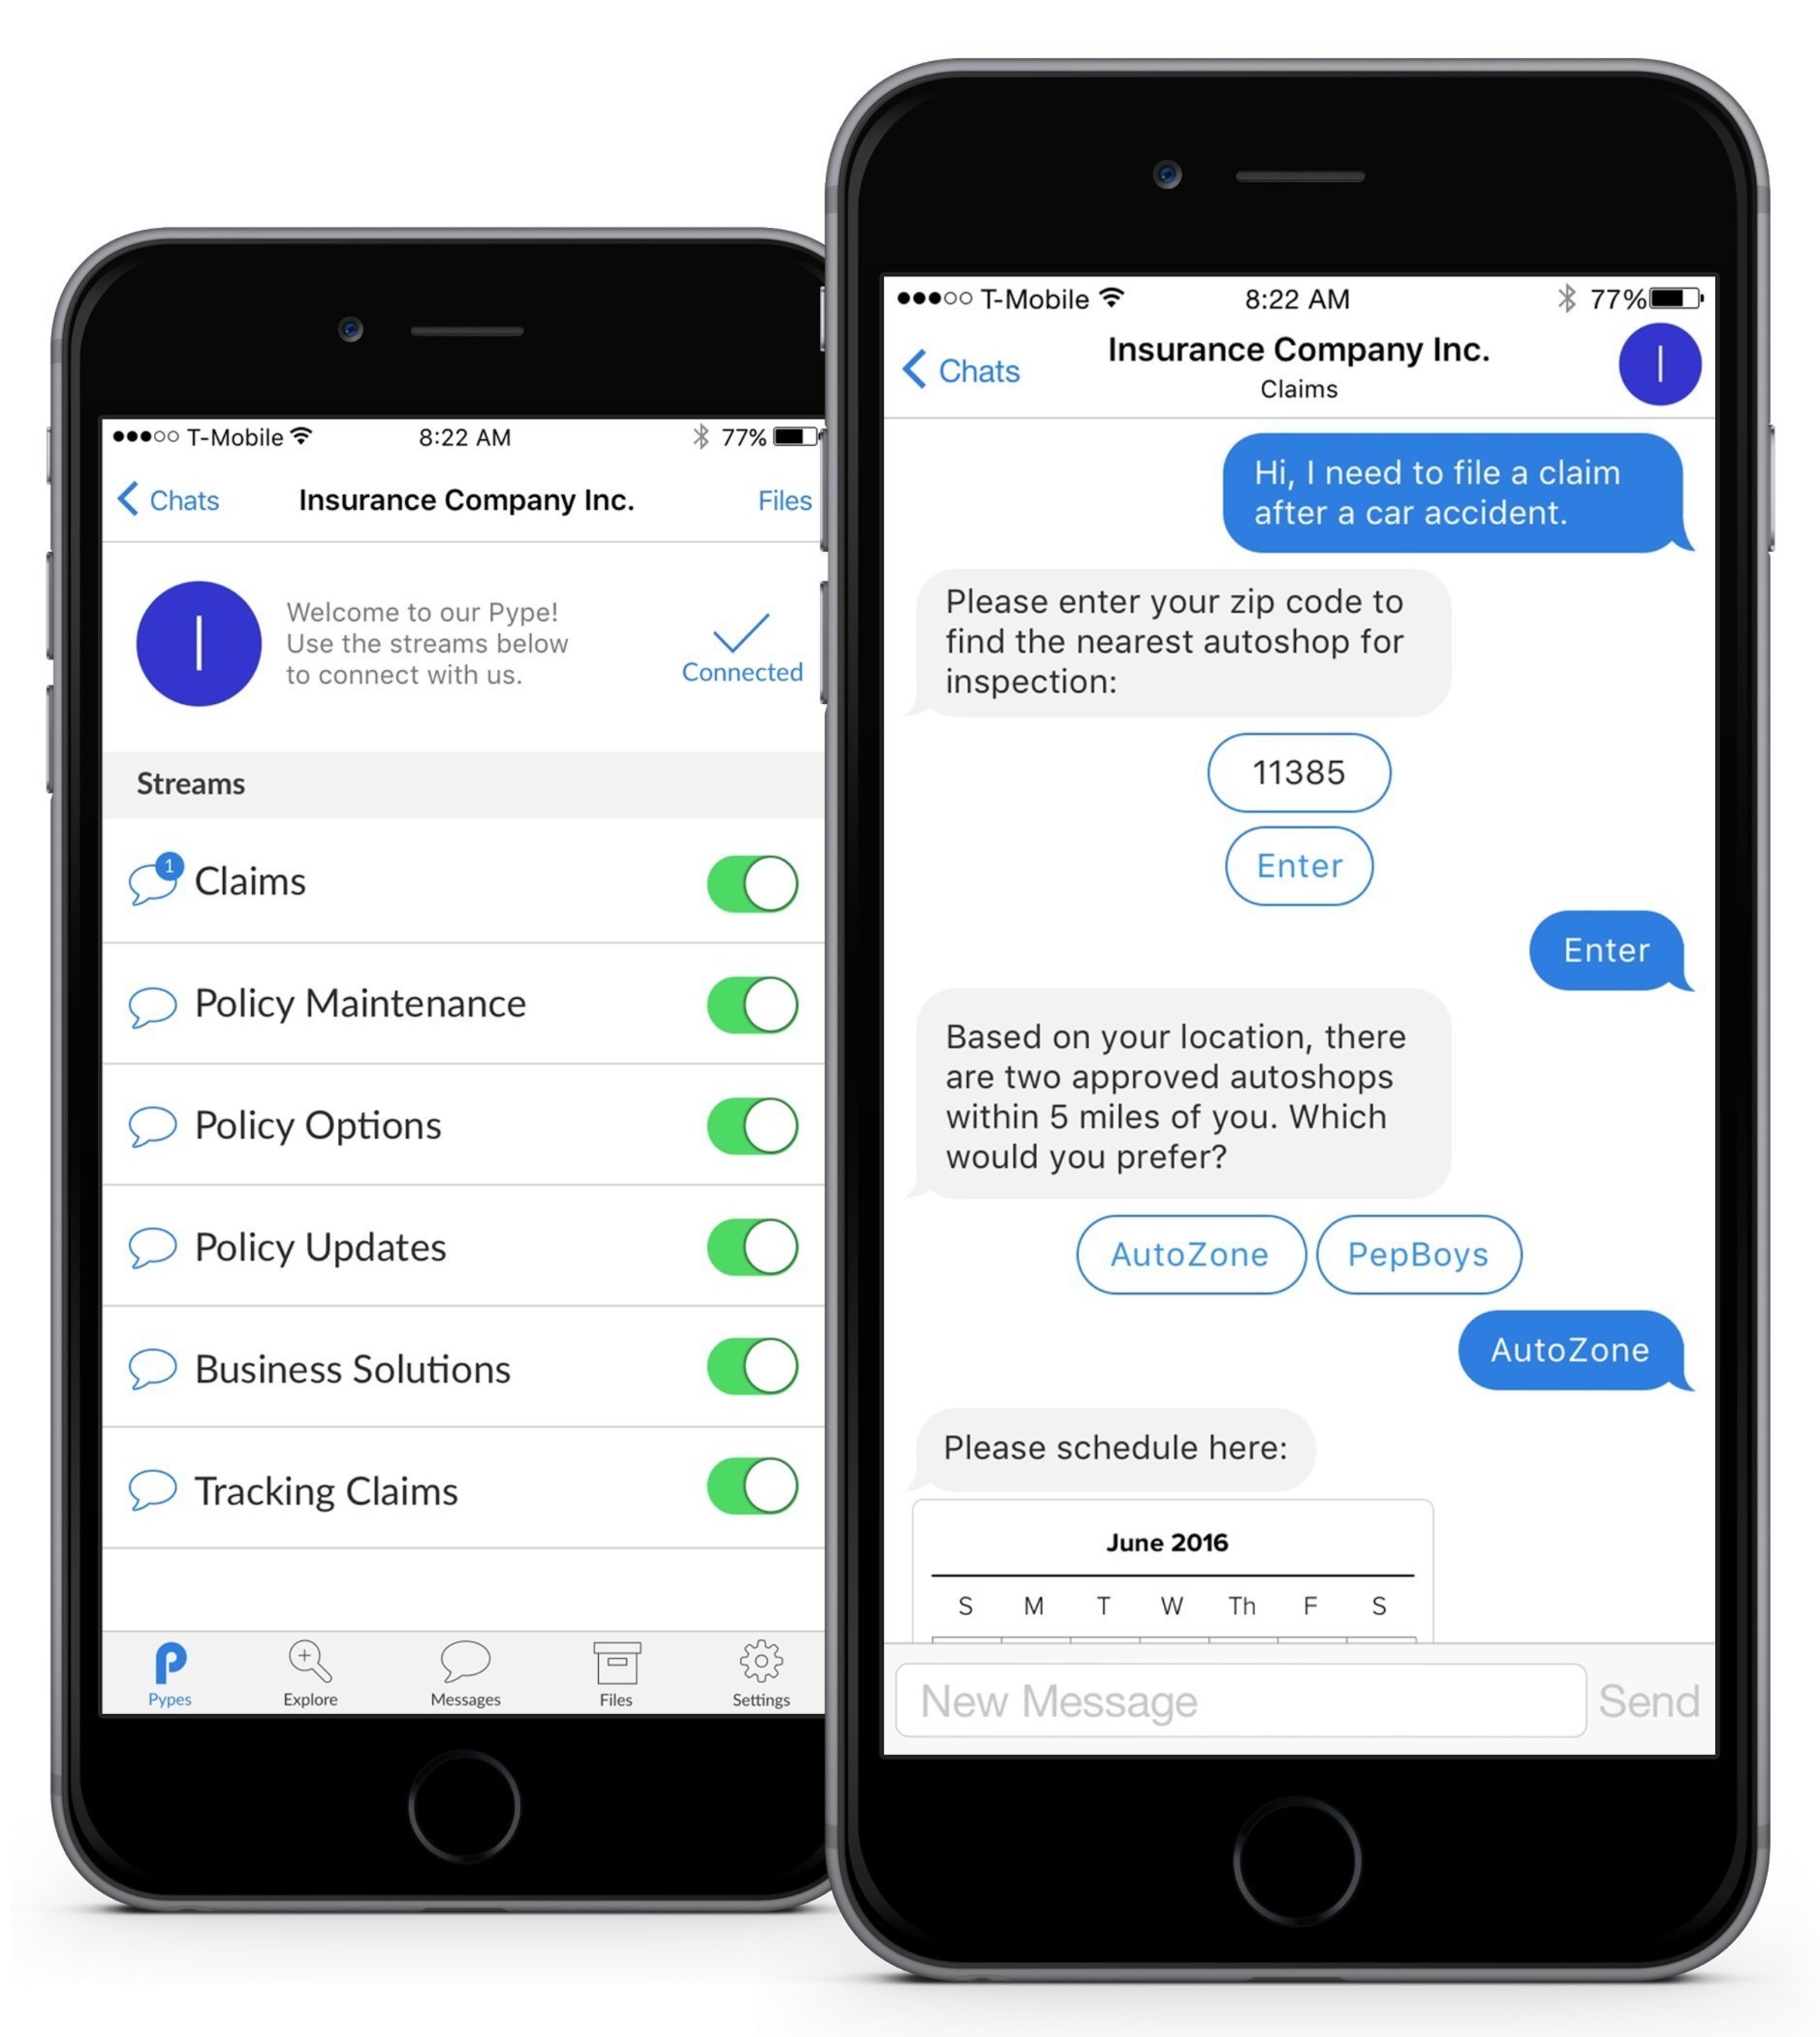 Using real-time chat and AI powered chatbots, Pypestream empowers enterprises and businesses to automate communication with customers - handling hundreds of messaging conversations with customers in real-time.